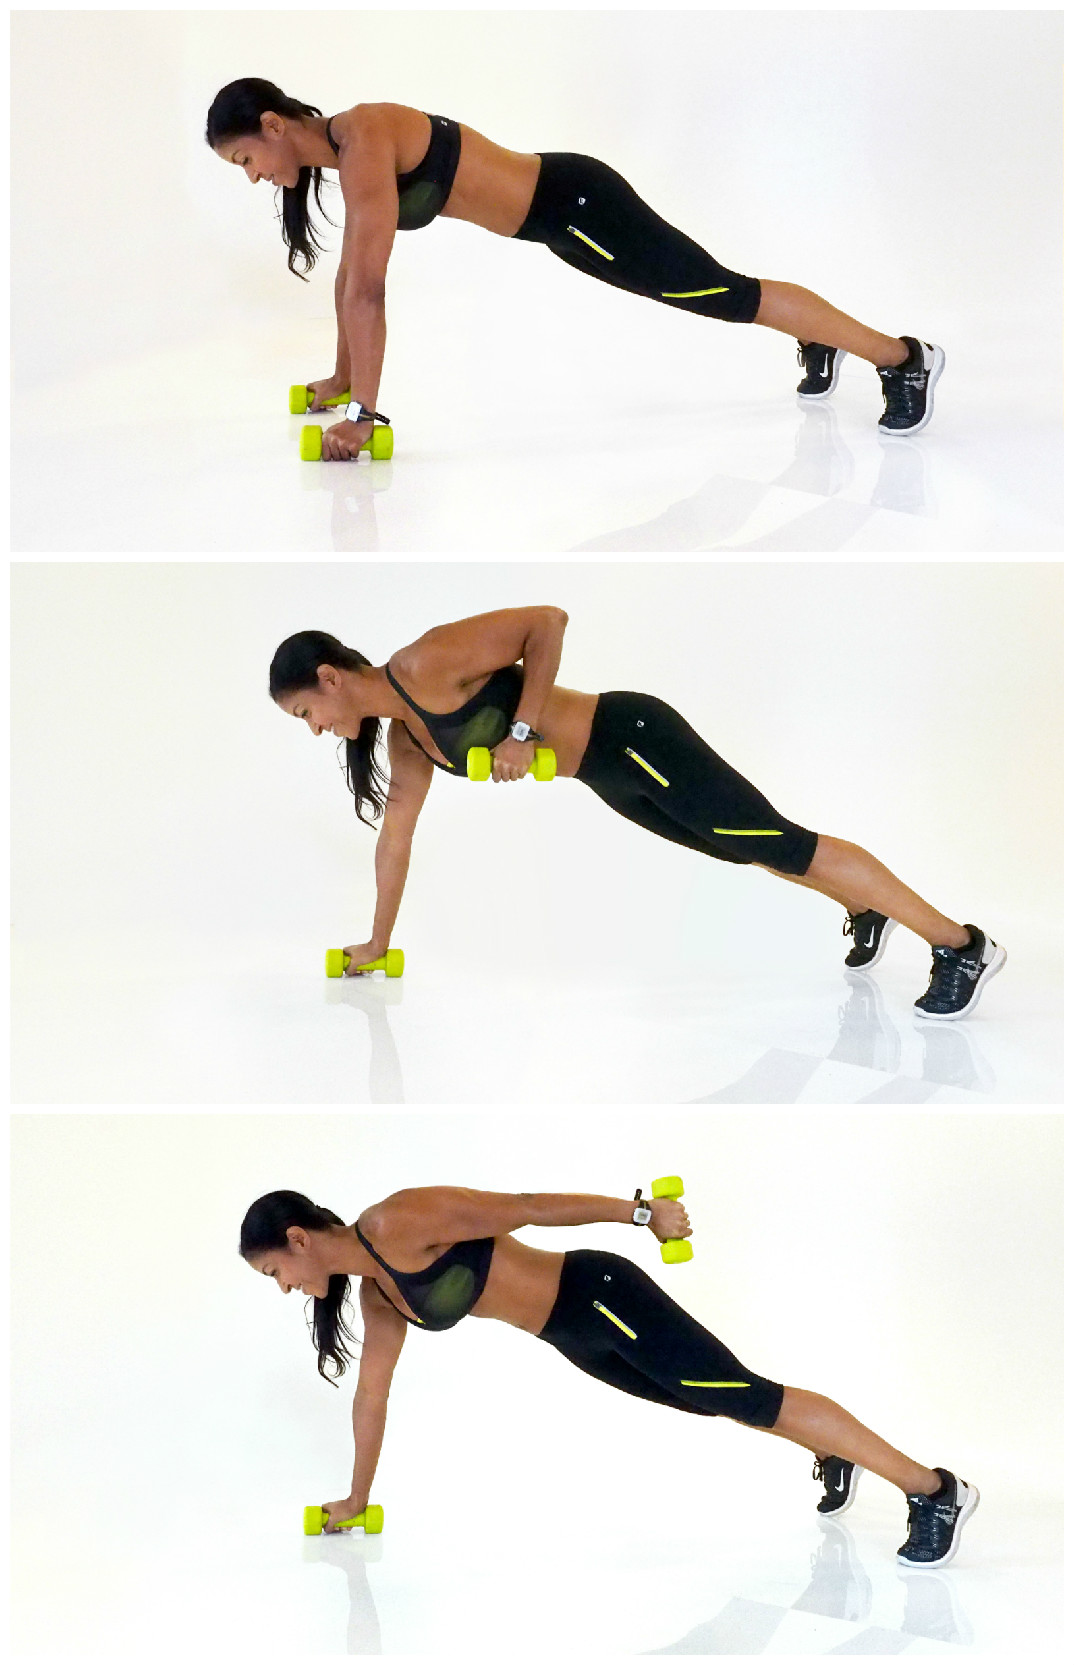 3 Push-up variations to take your arm workout up a notch